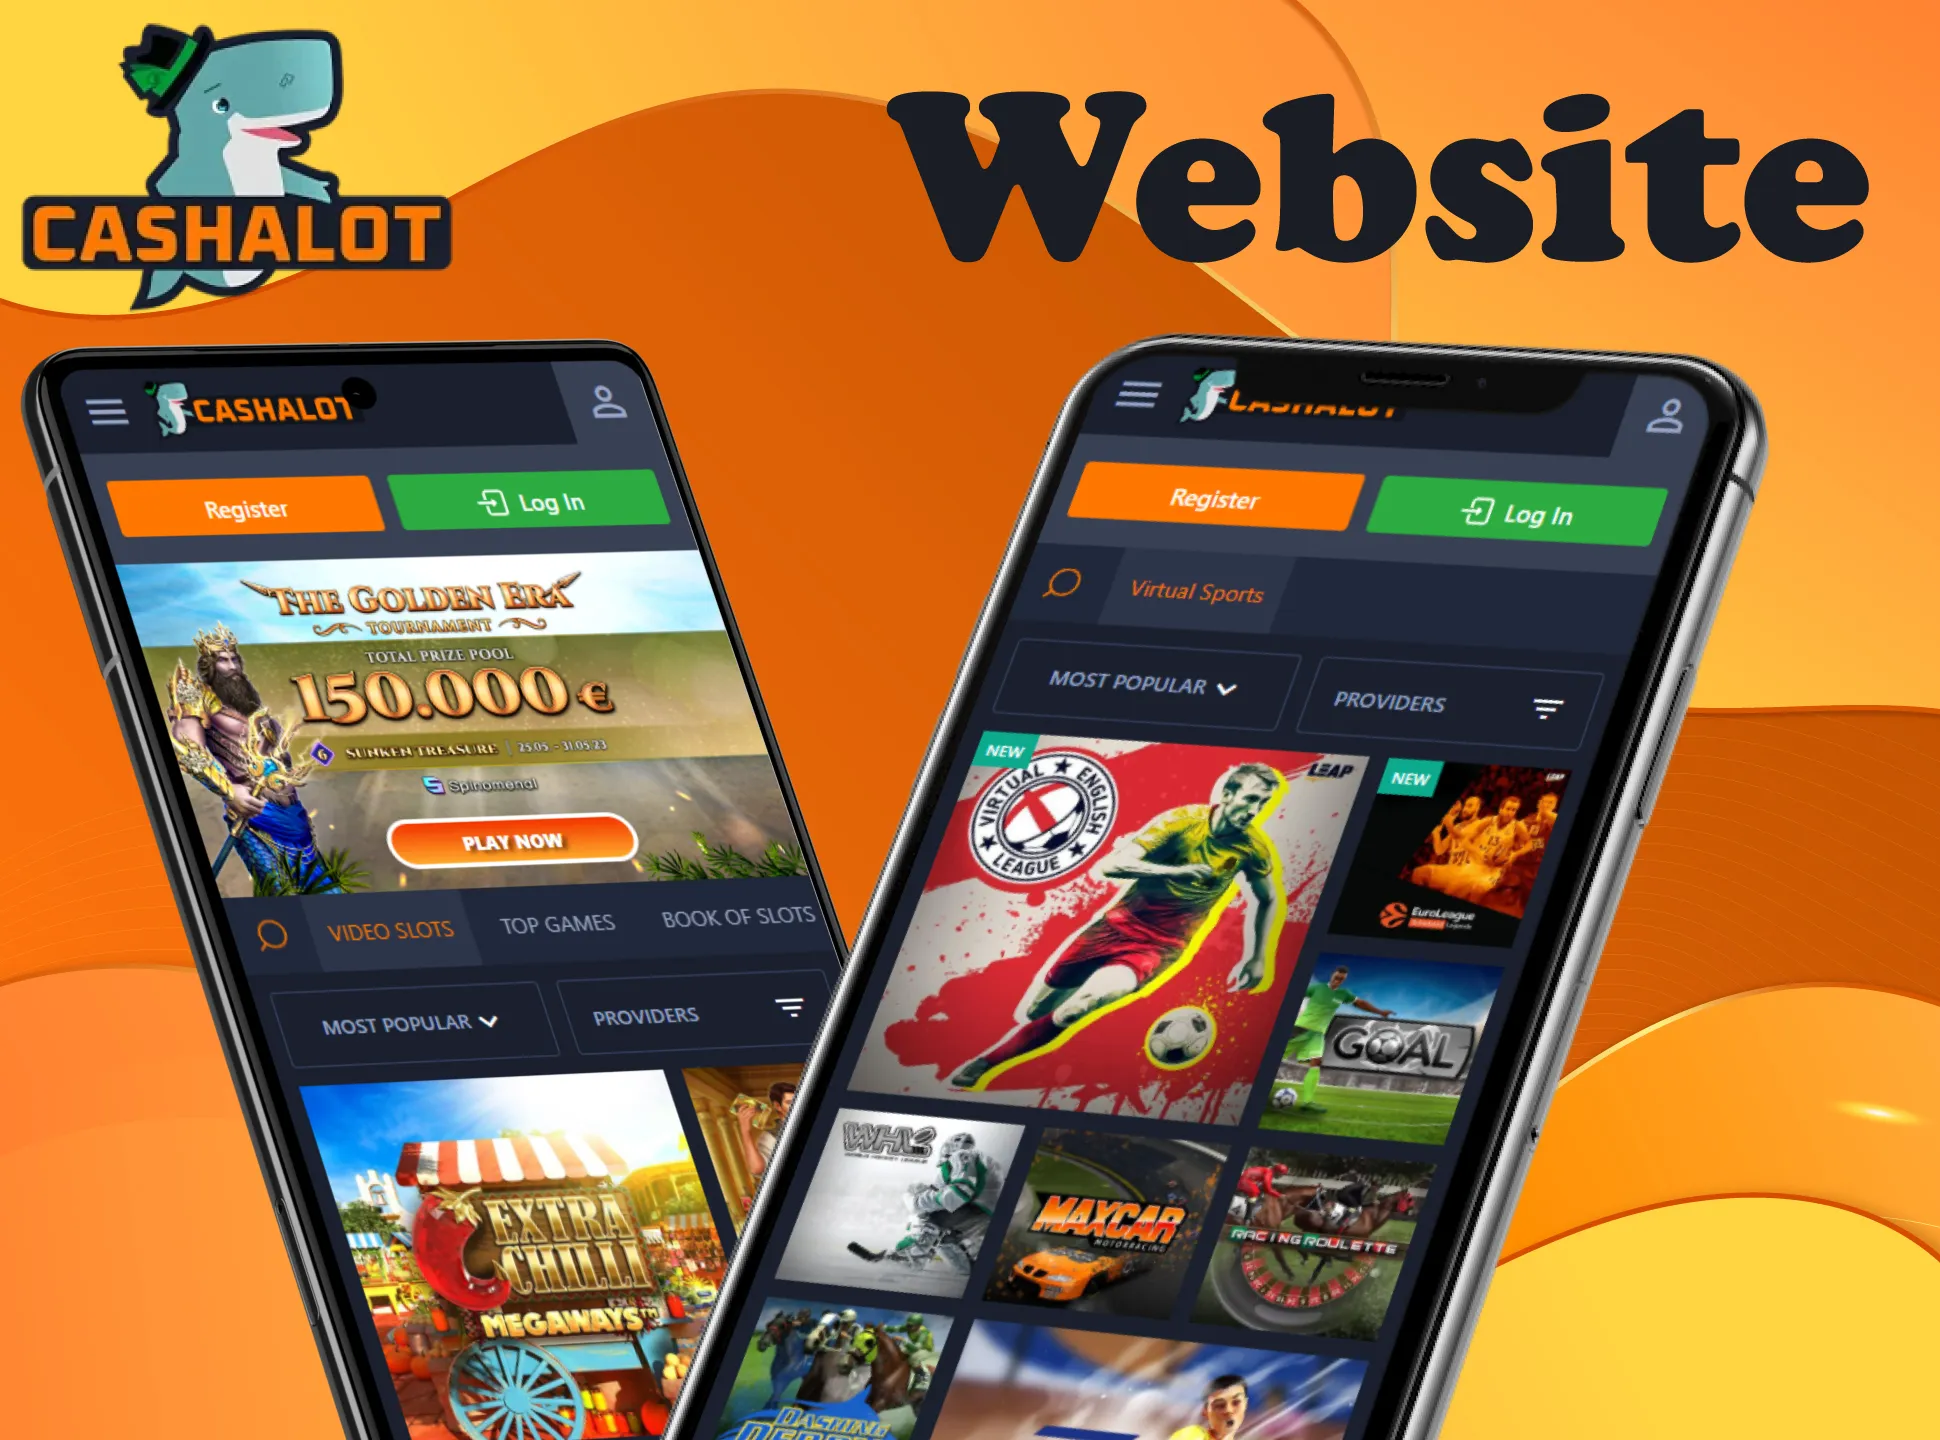 Cashalot website has many useful features.